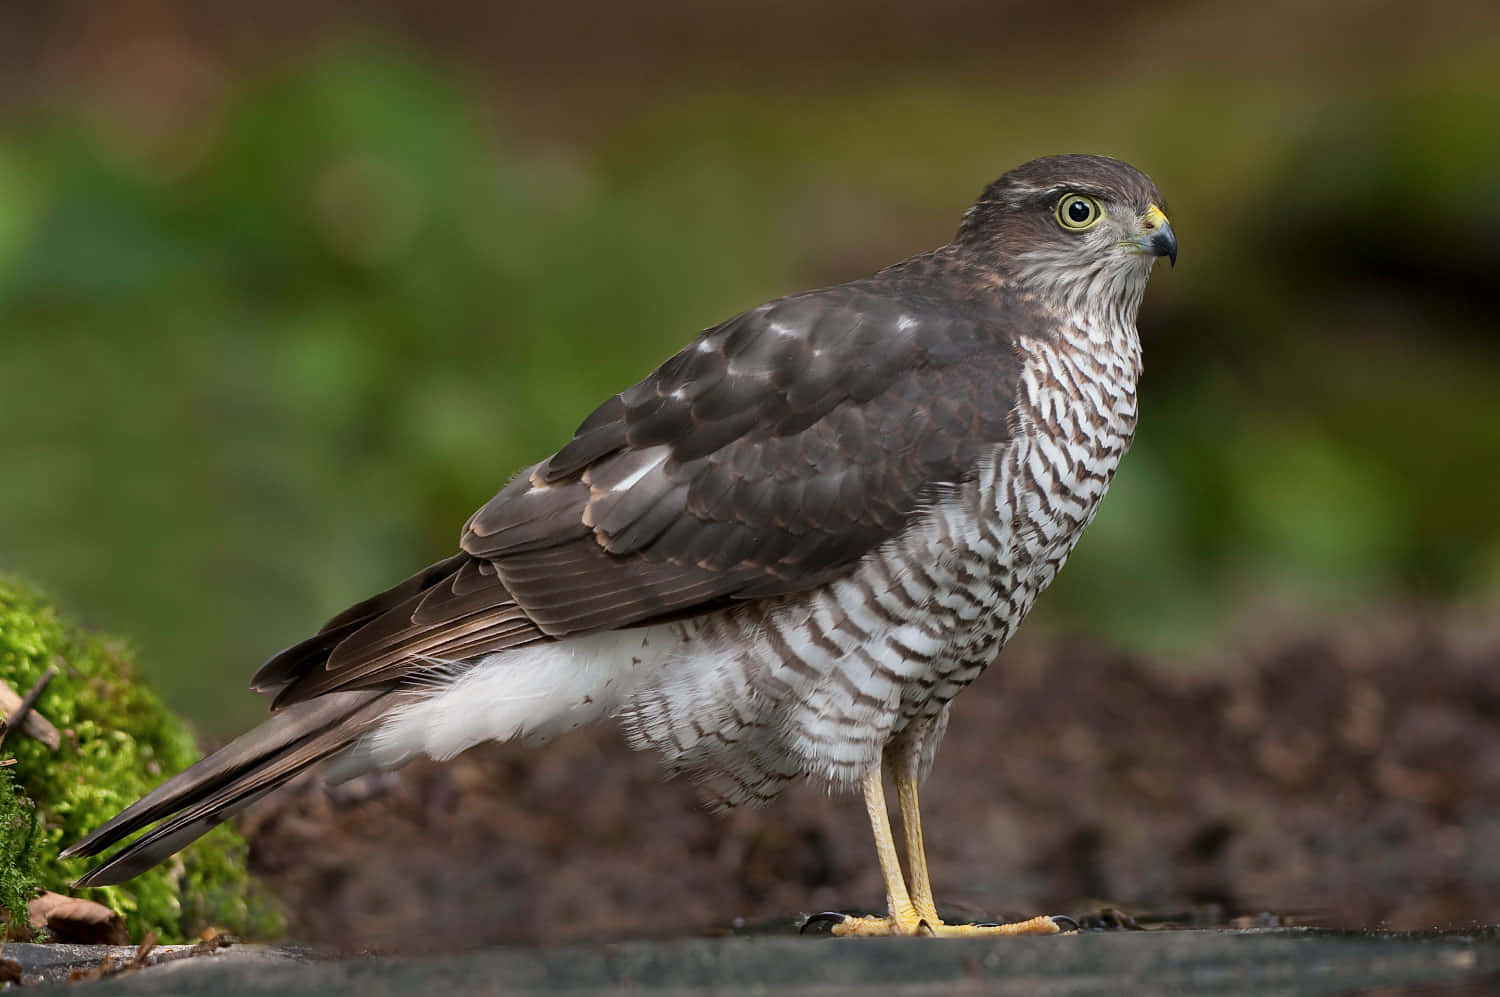 Close-up of a Sparrow Hawk perched on a branch